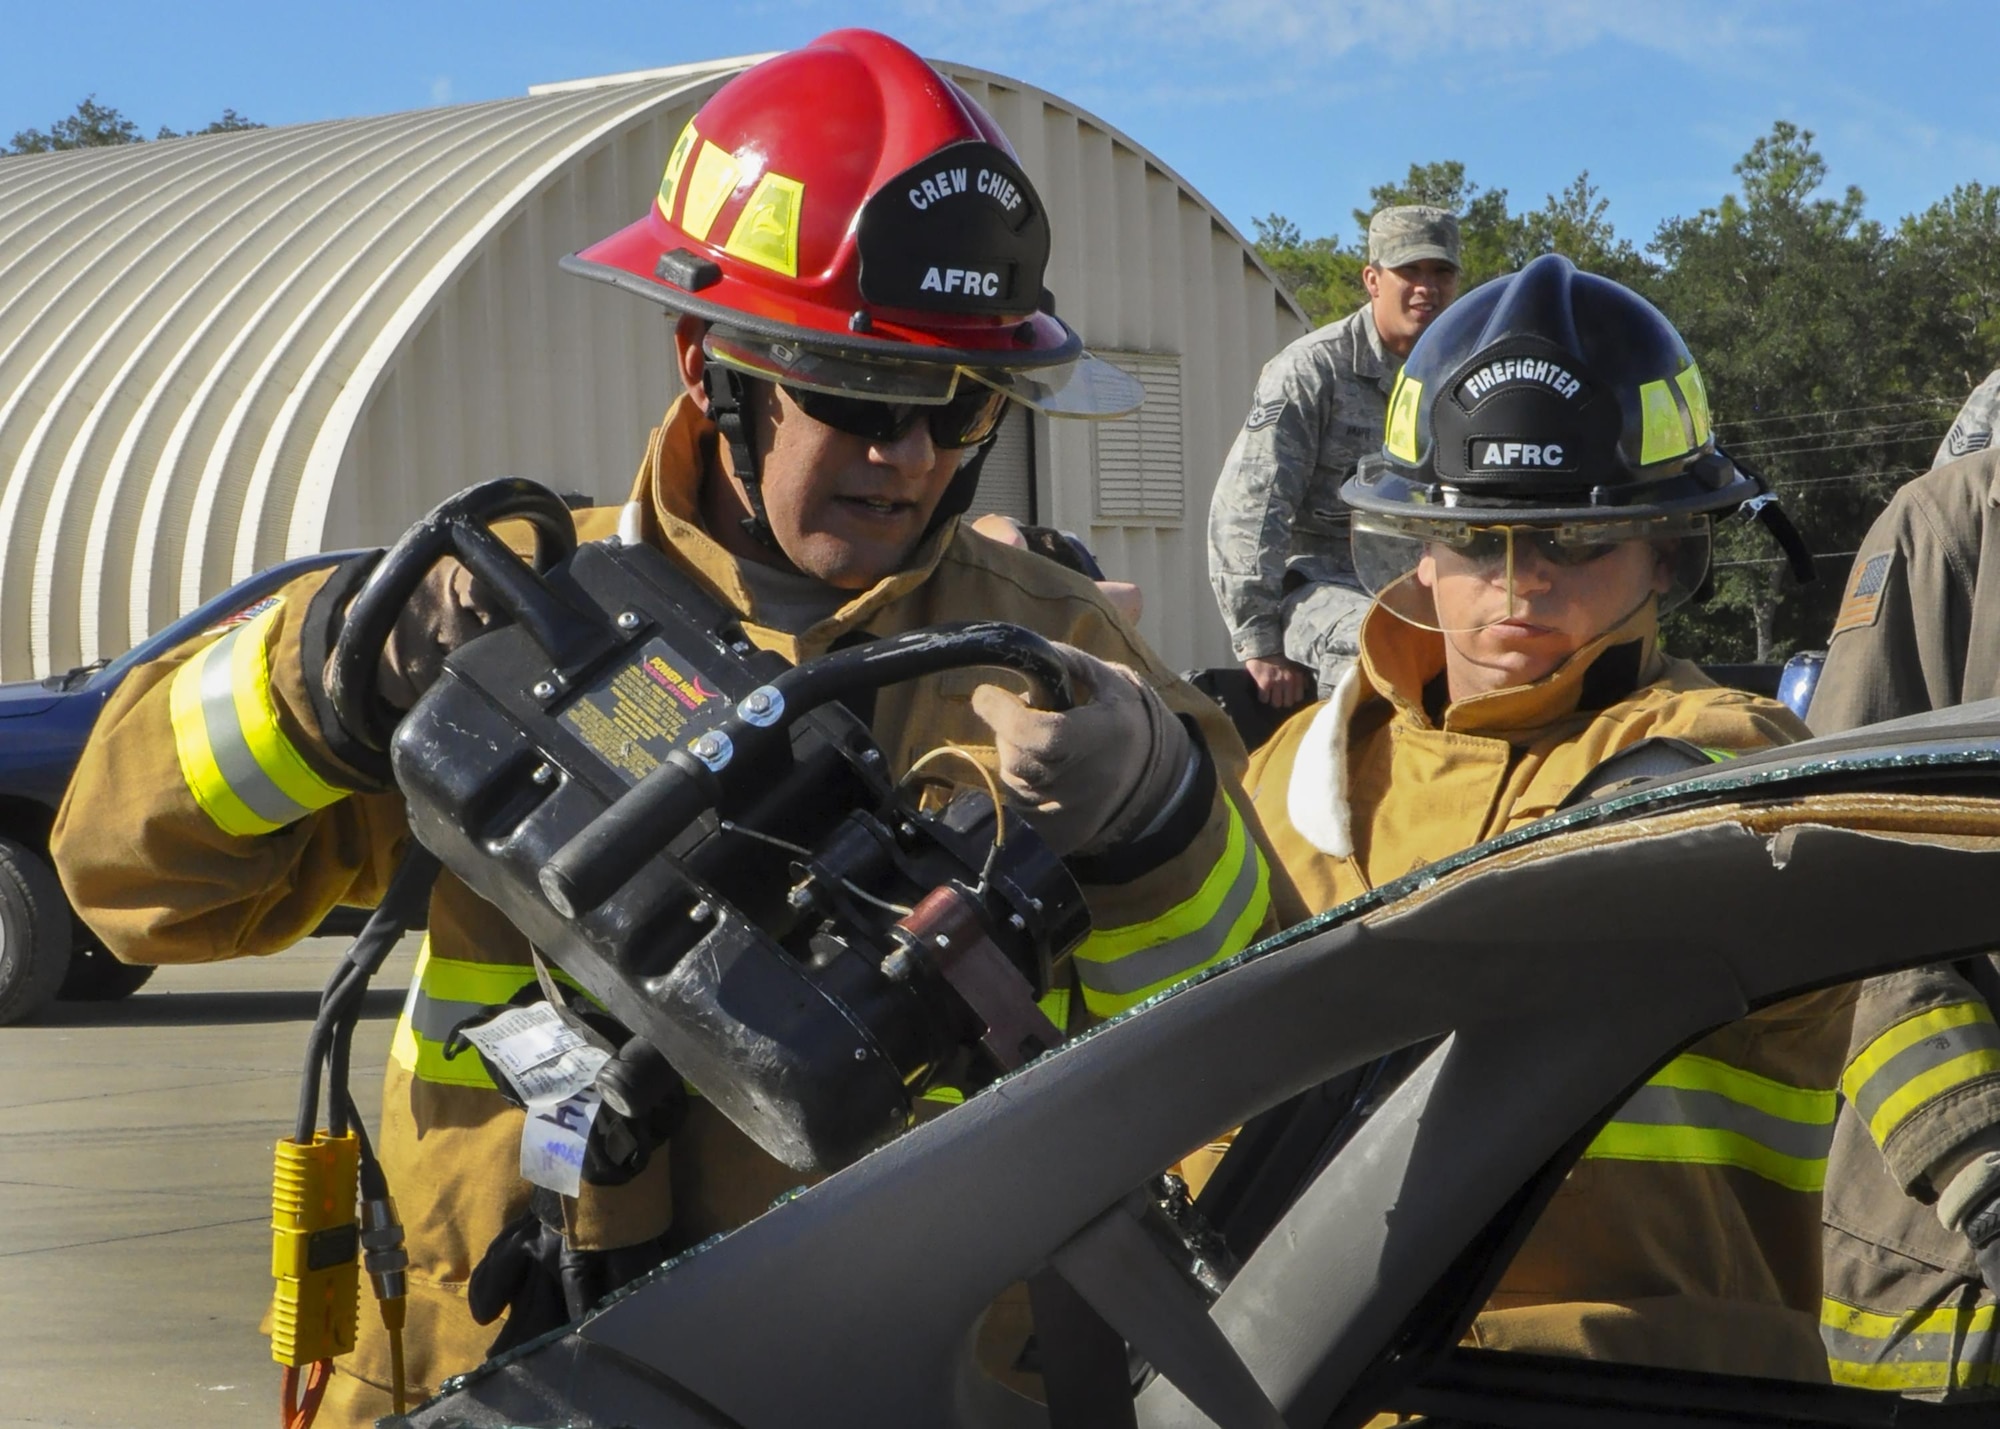 A 919th Special Operations Wing firefighter uses a prying tool to open the car door during an extraction training exercise at Duke Field, Fla., Nov. 6. The wing’s firefighters took part in the exercise to meet their bi-annual training requirement.  (U.S. Air Force photo/Dan Neely)